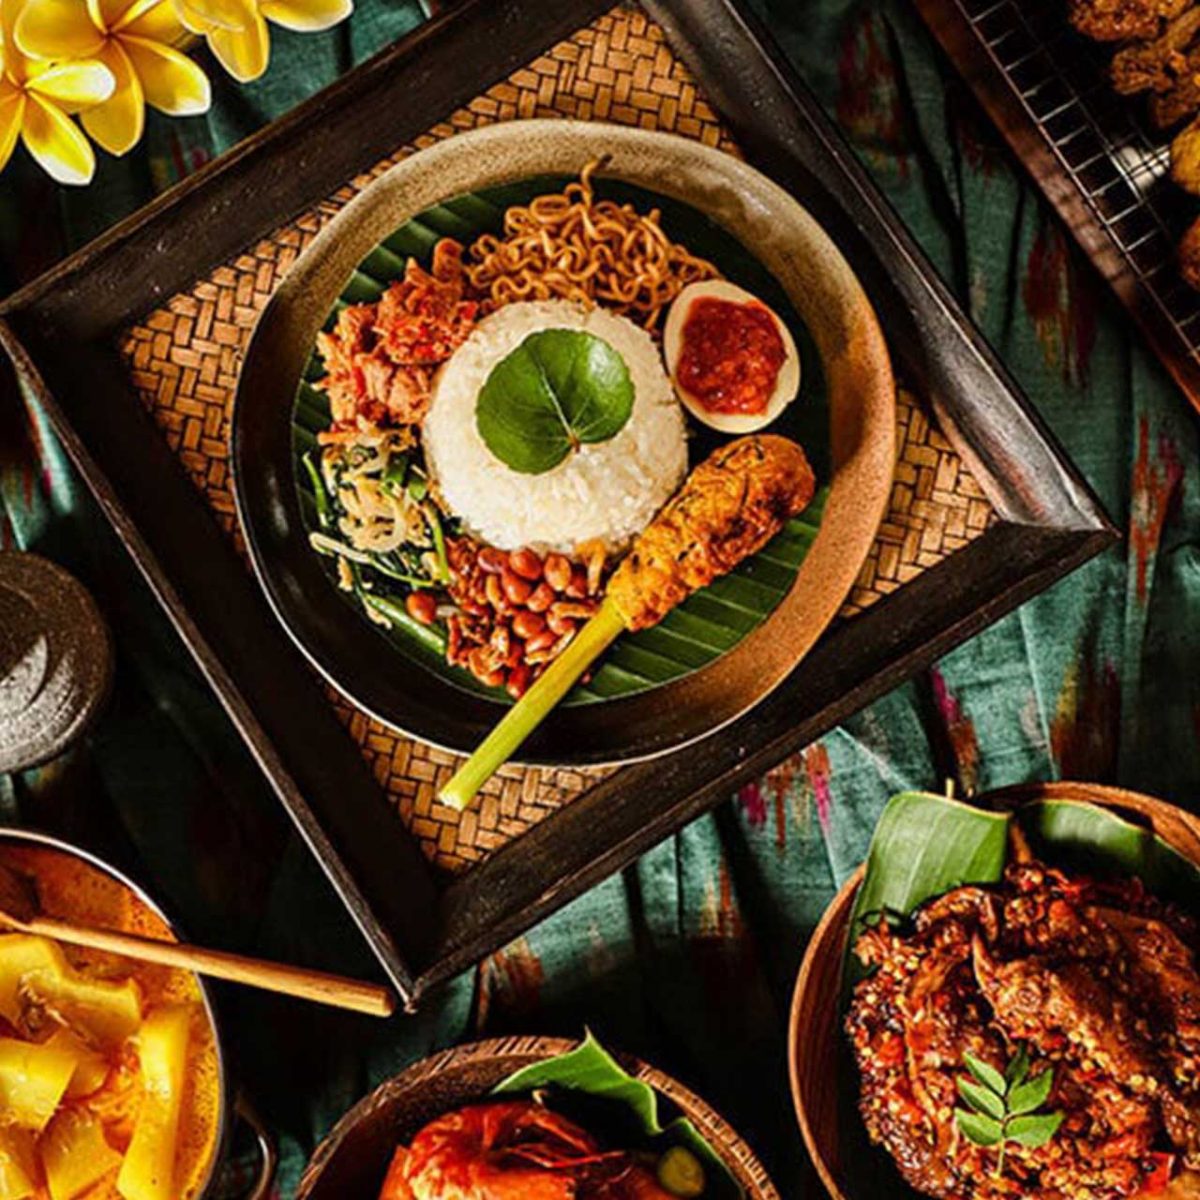 Get to know the various types of food in Canggu and their places